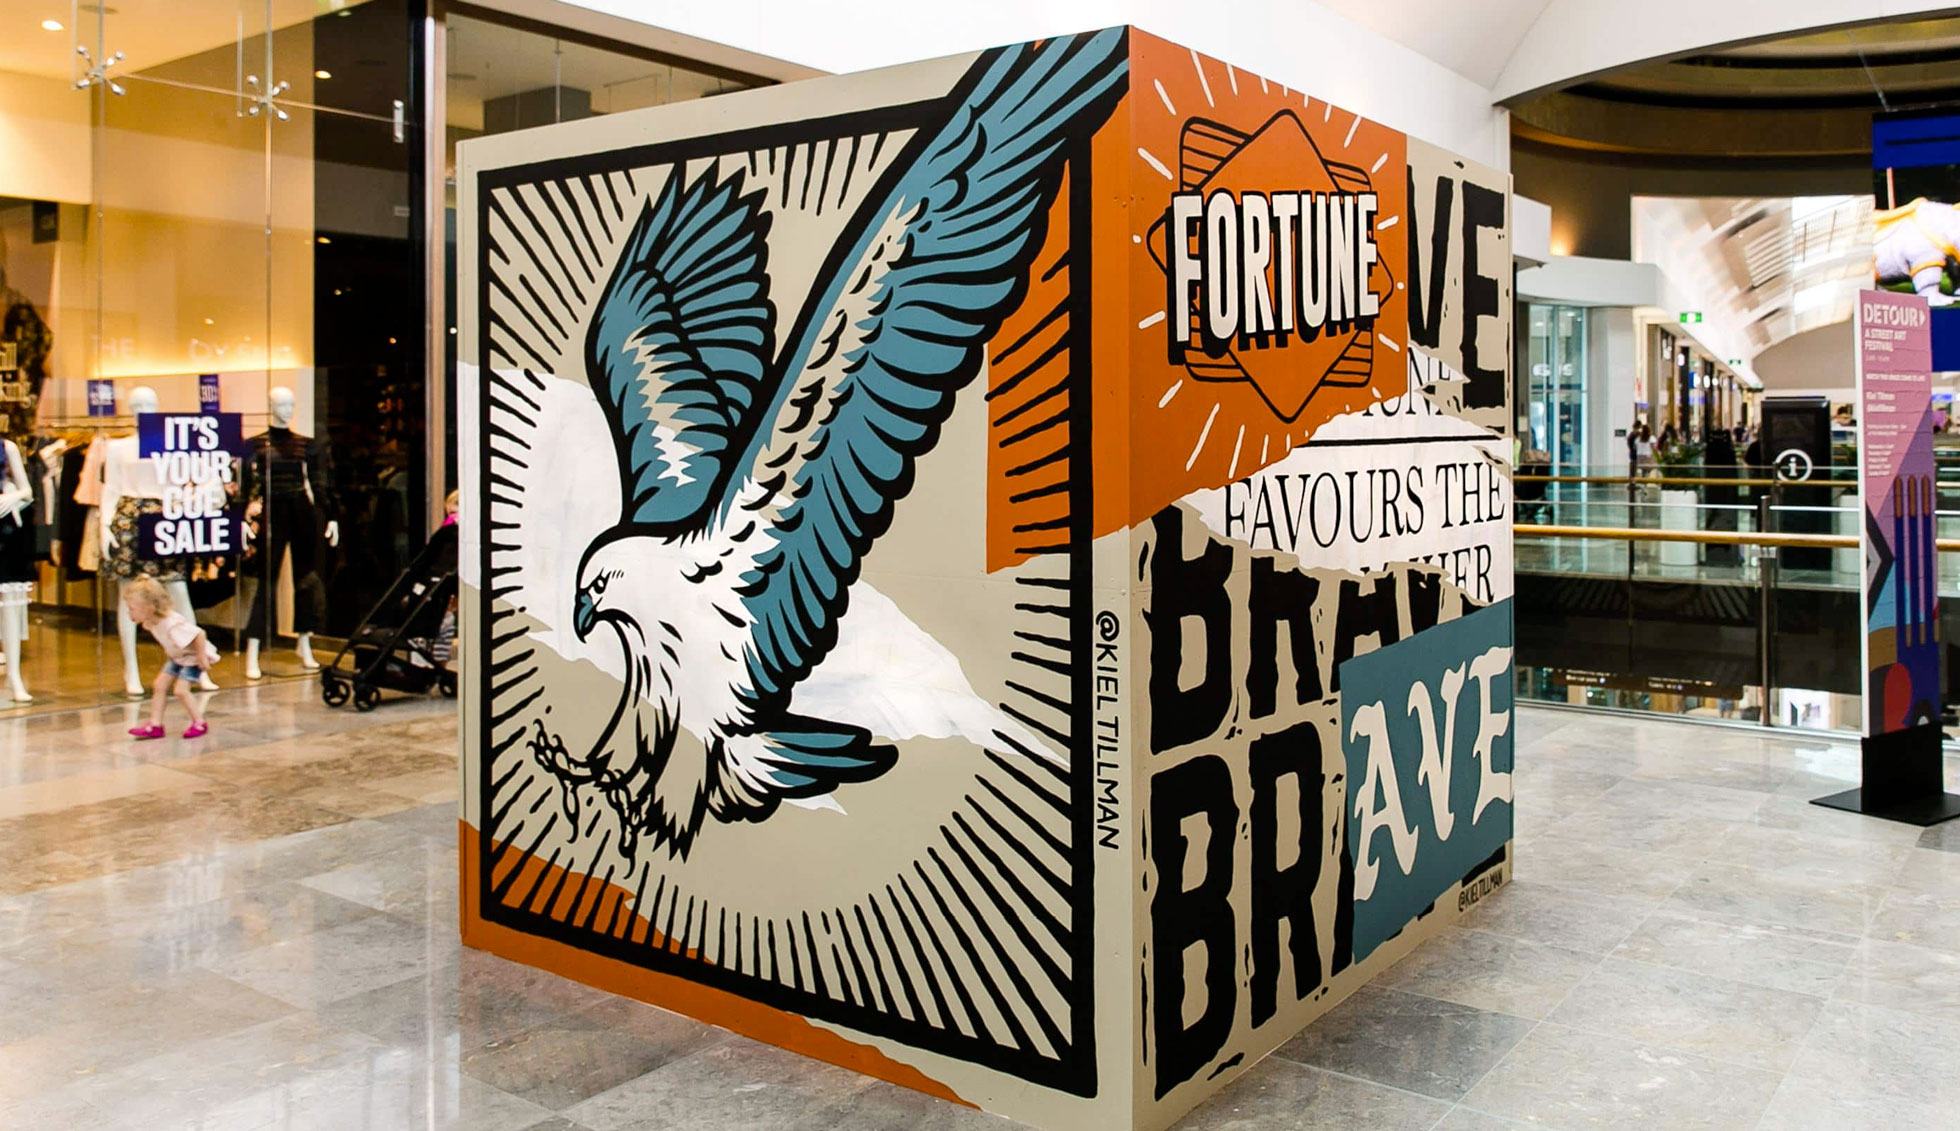 A freestanding cube is covered in an iconic Tillman mural, placed in the centre of the shopping walkway